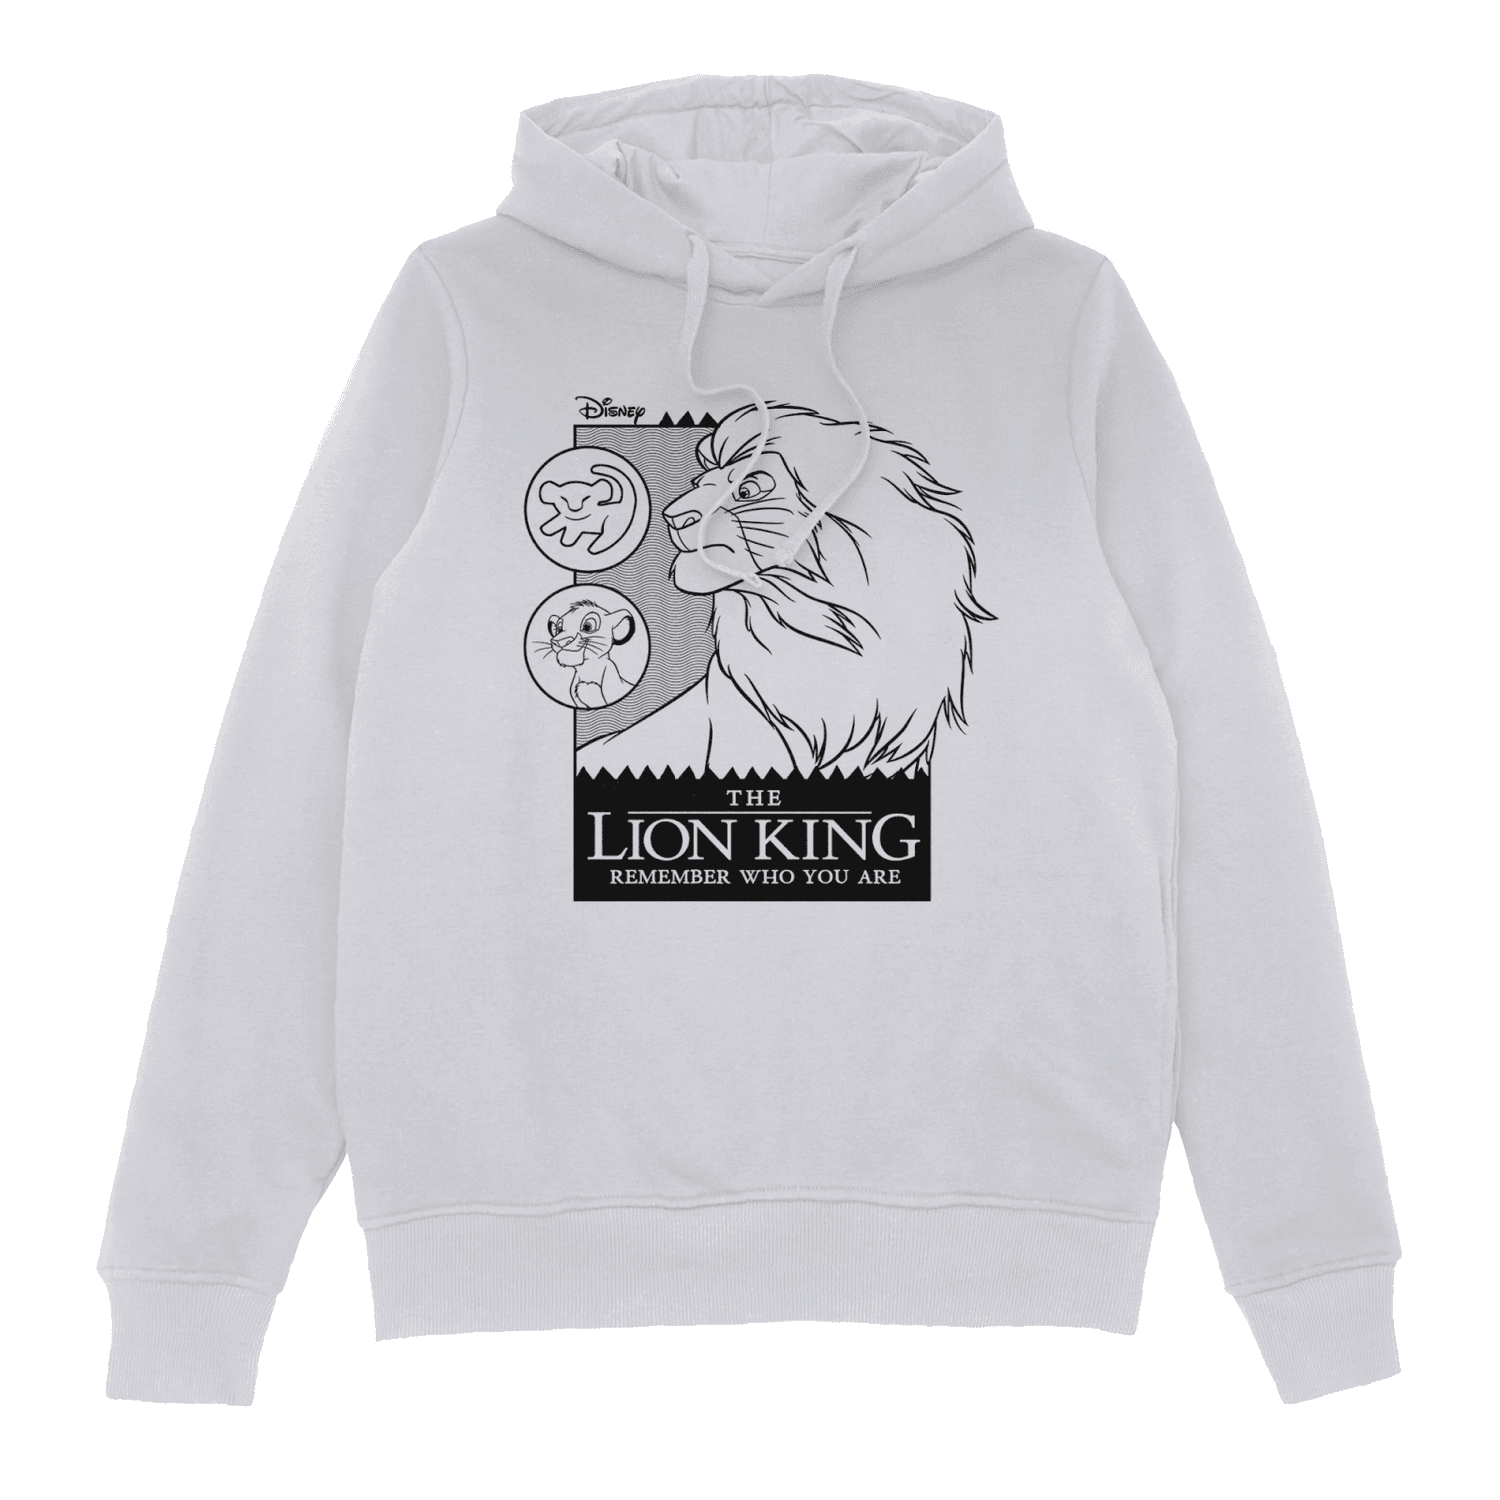 Lion King Remember Who You Are Kids' Hoodie - White